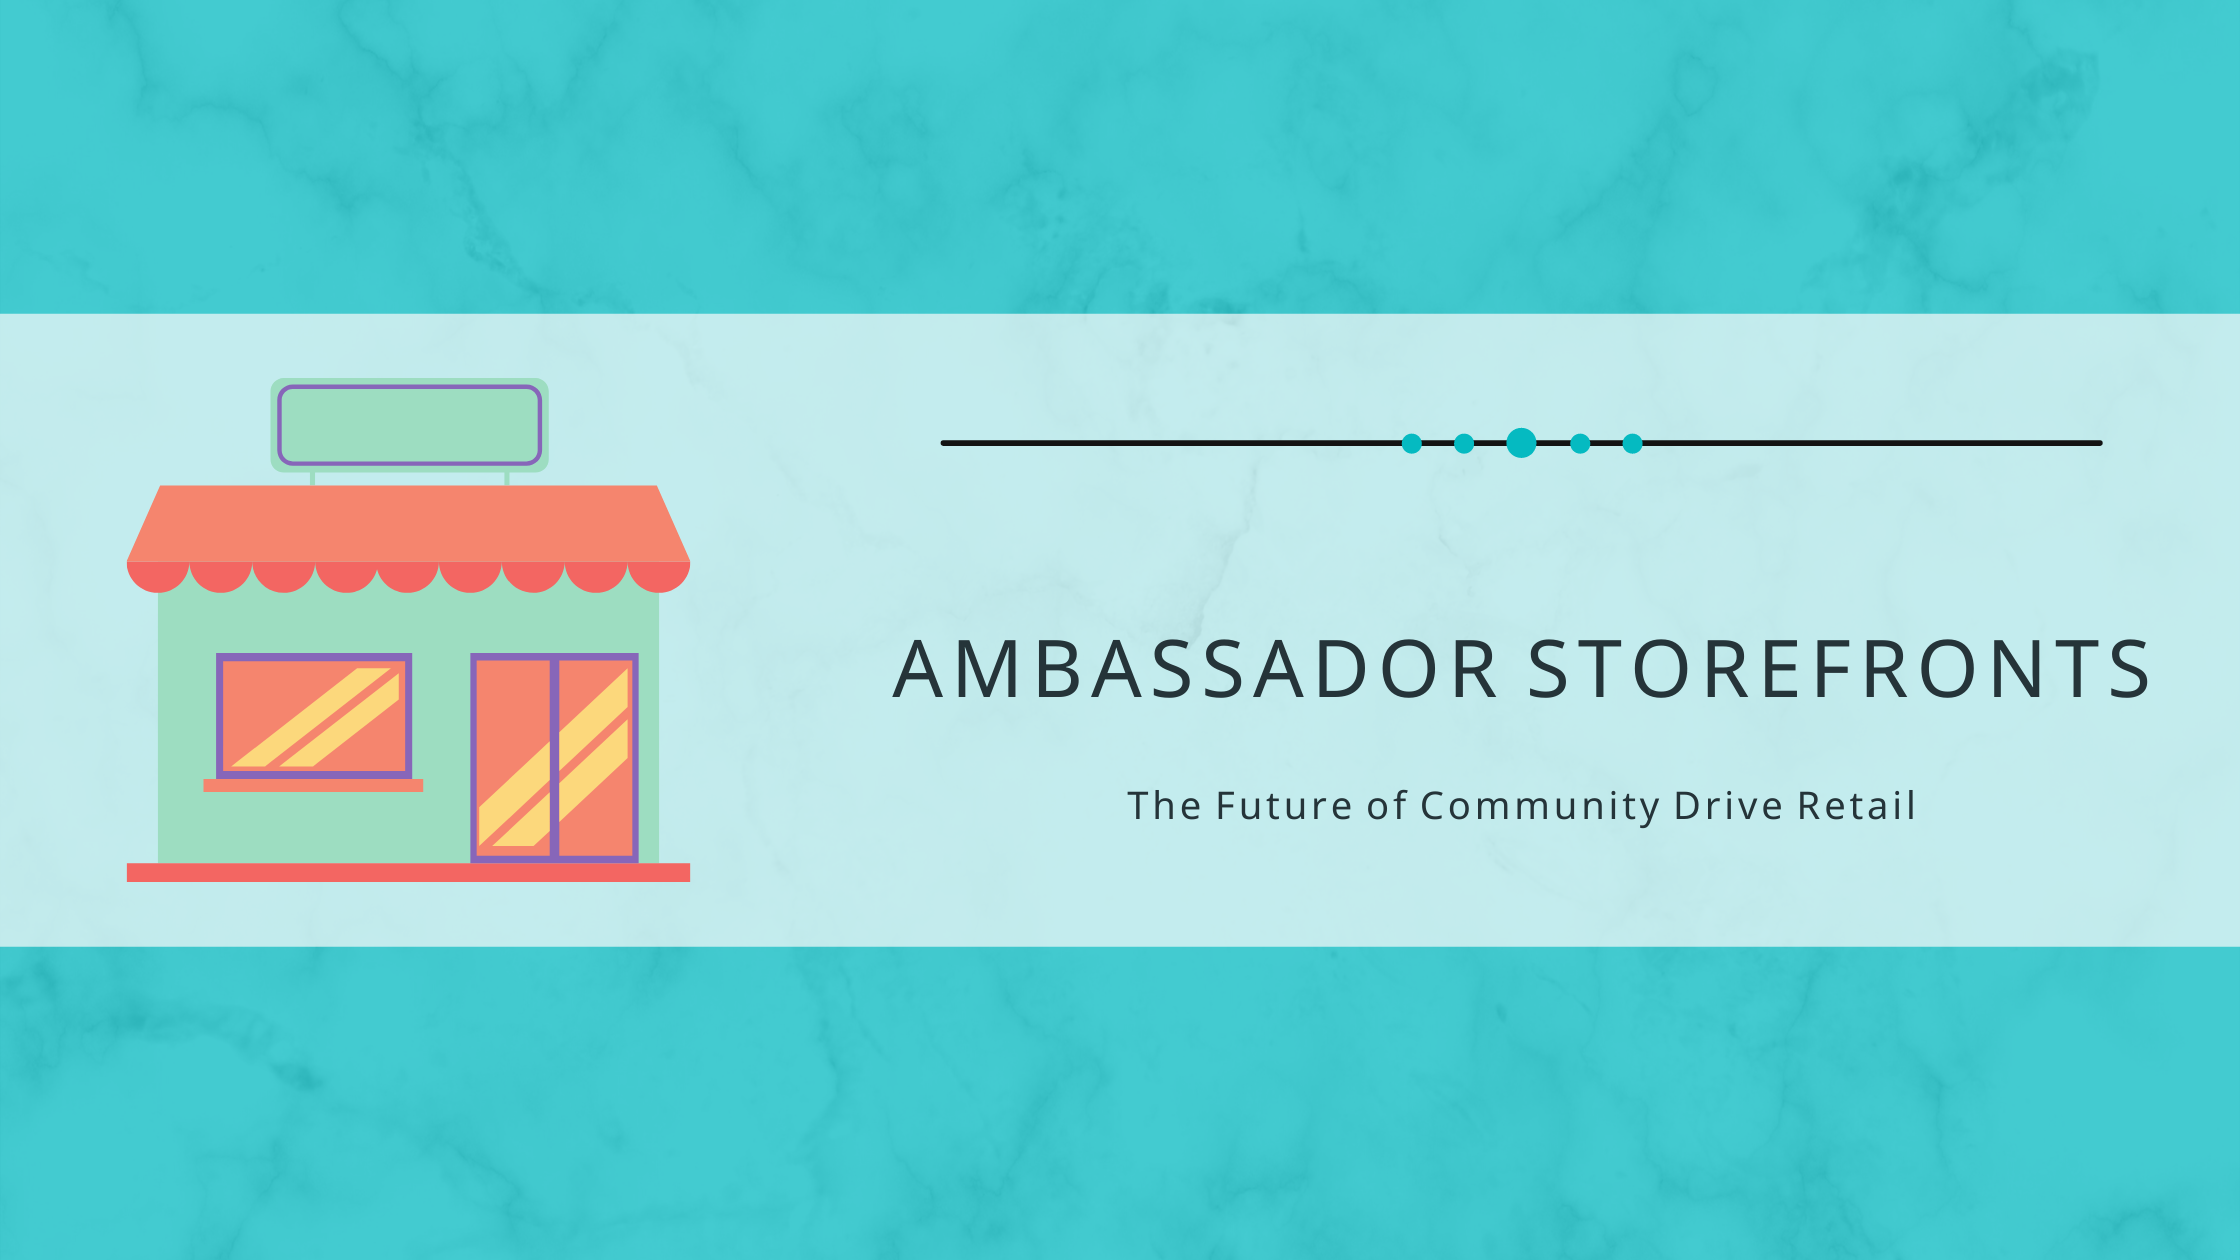 Ambassador Storefronts? The future of community-driven retail